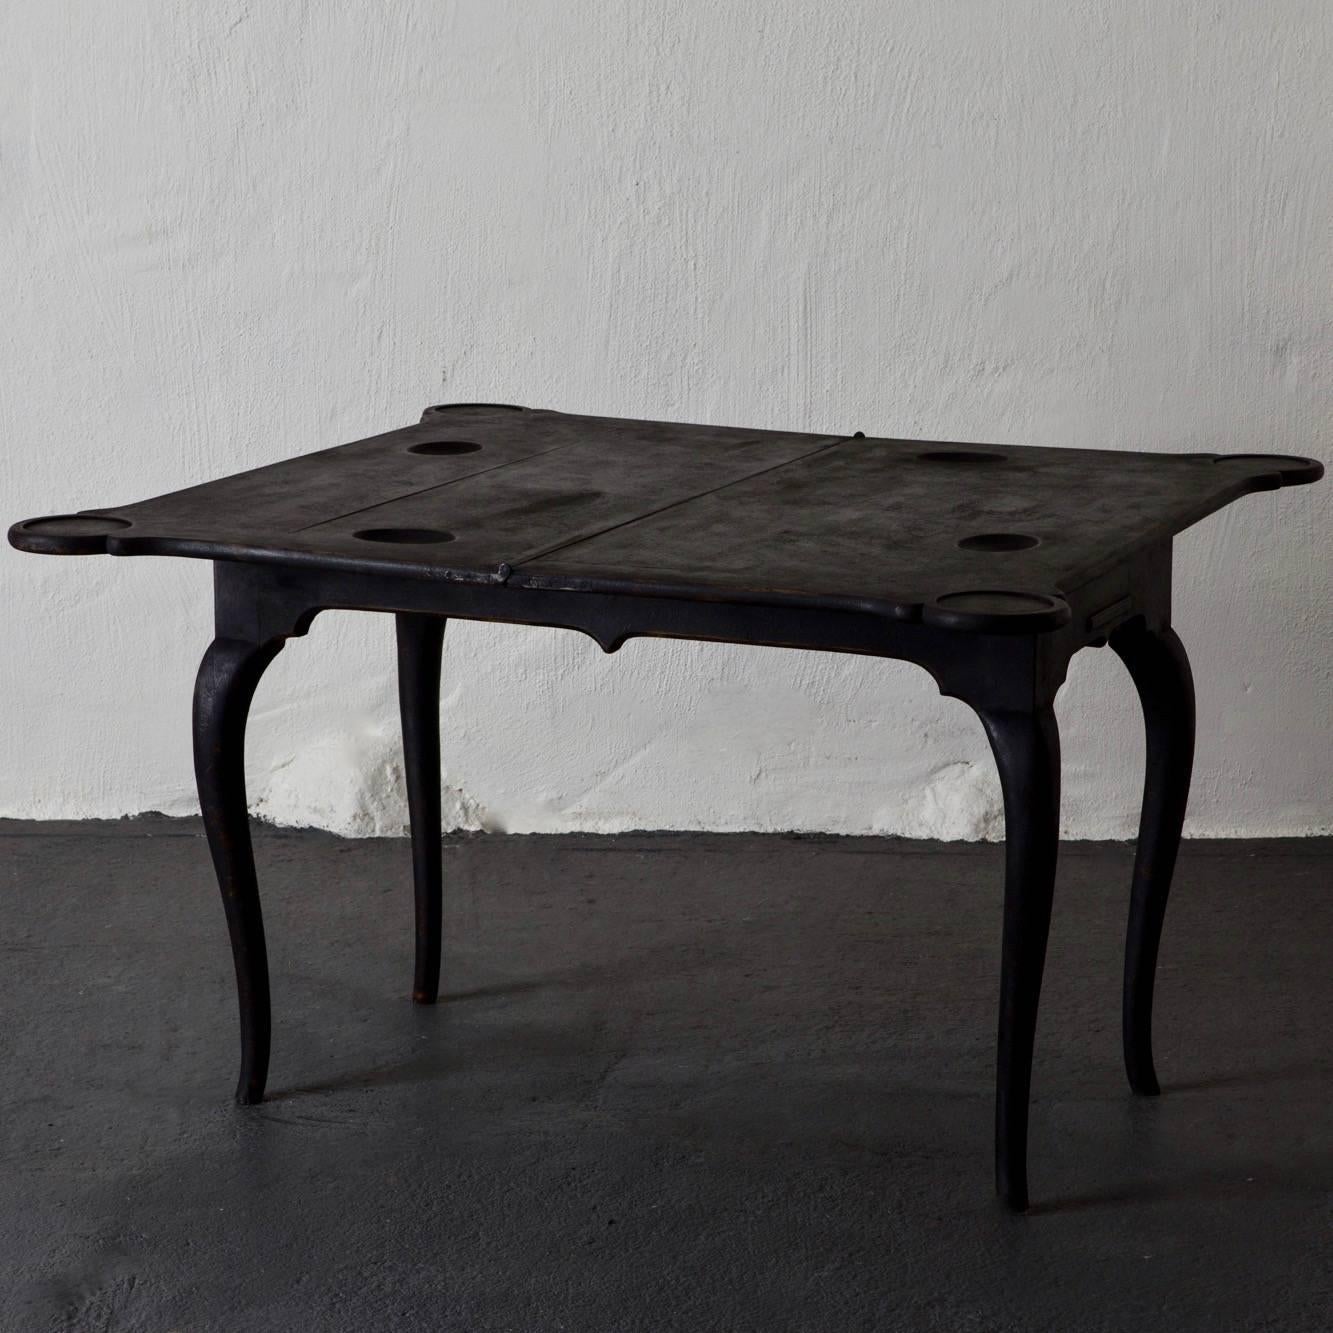 Table Game Swedish Black Rococo 18th Century Sweden. Game table made during the 18th century in Sweden. Cabriole legs. Top opens up to double size. Interior with backgammon and markers. Painted in our signature color Laserow Black. Open: 44